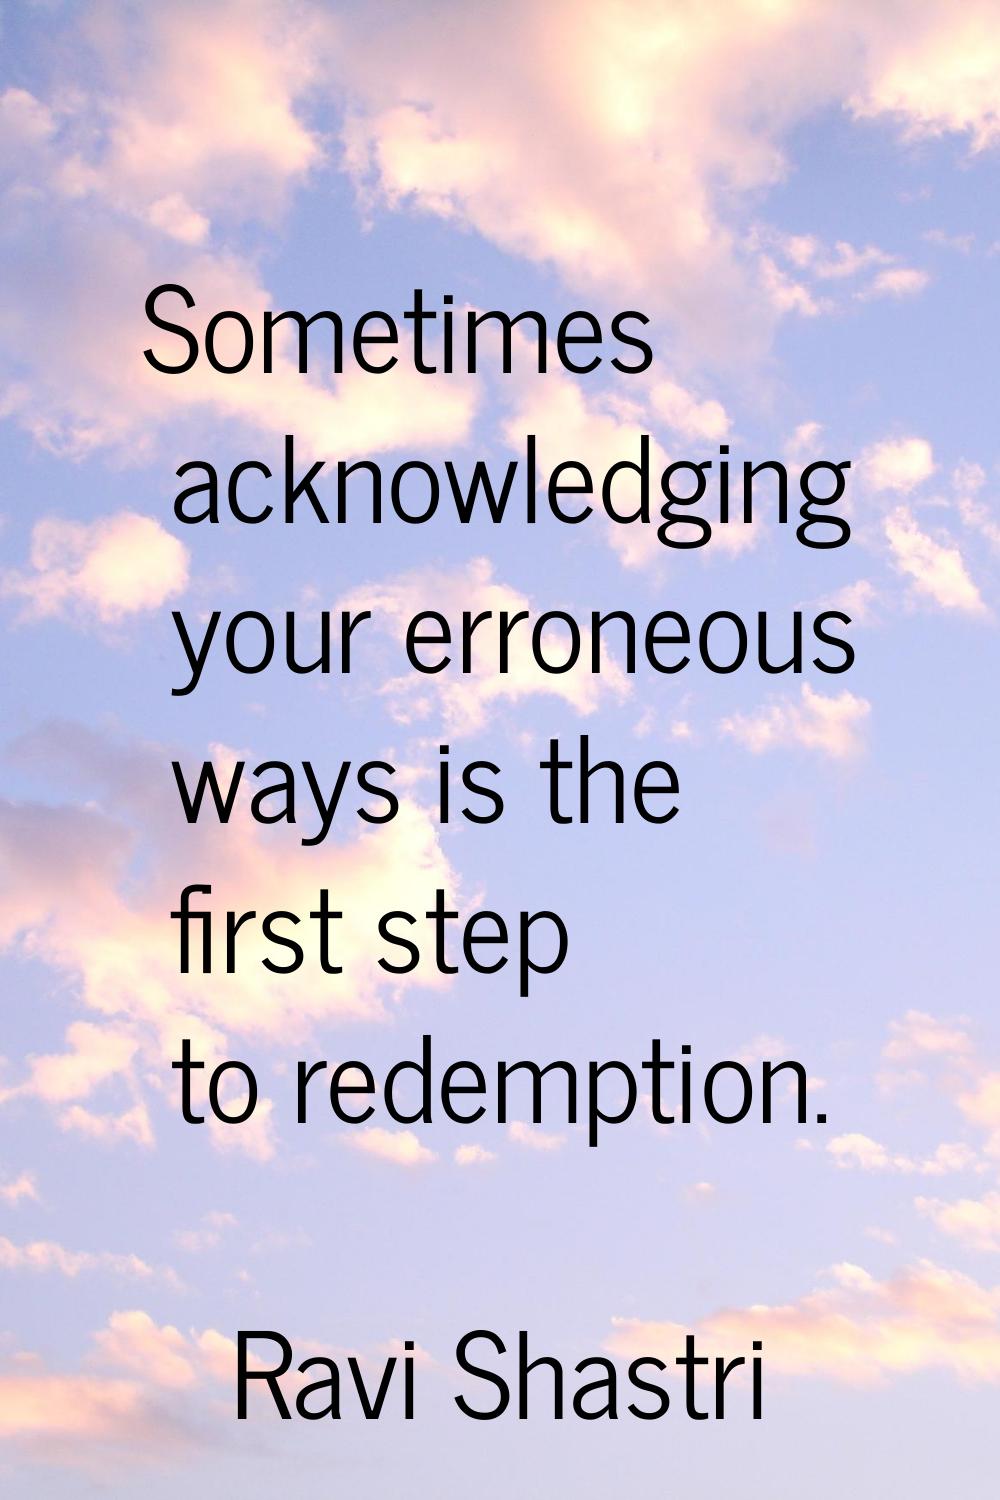 Sometimes acknowledging your erroneous ways is the first step to redemption.